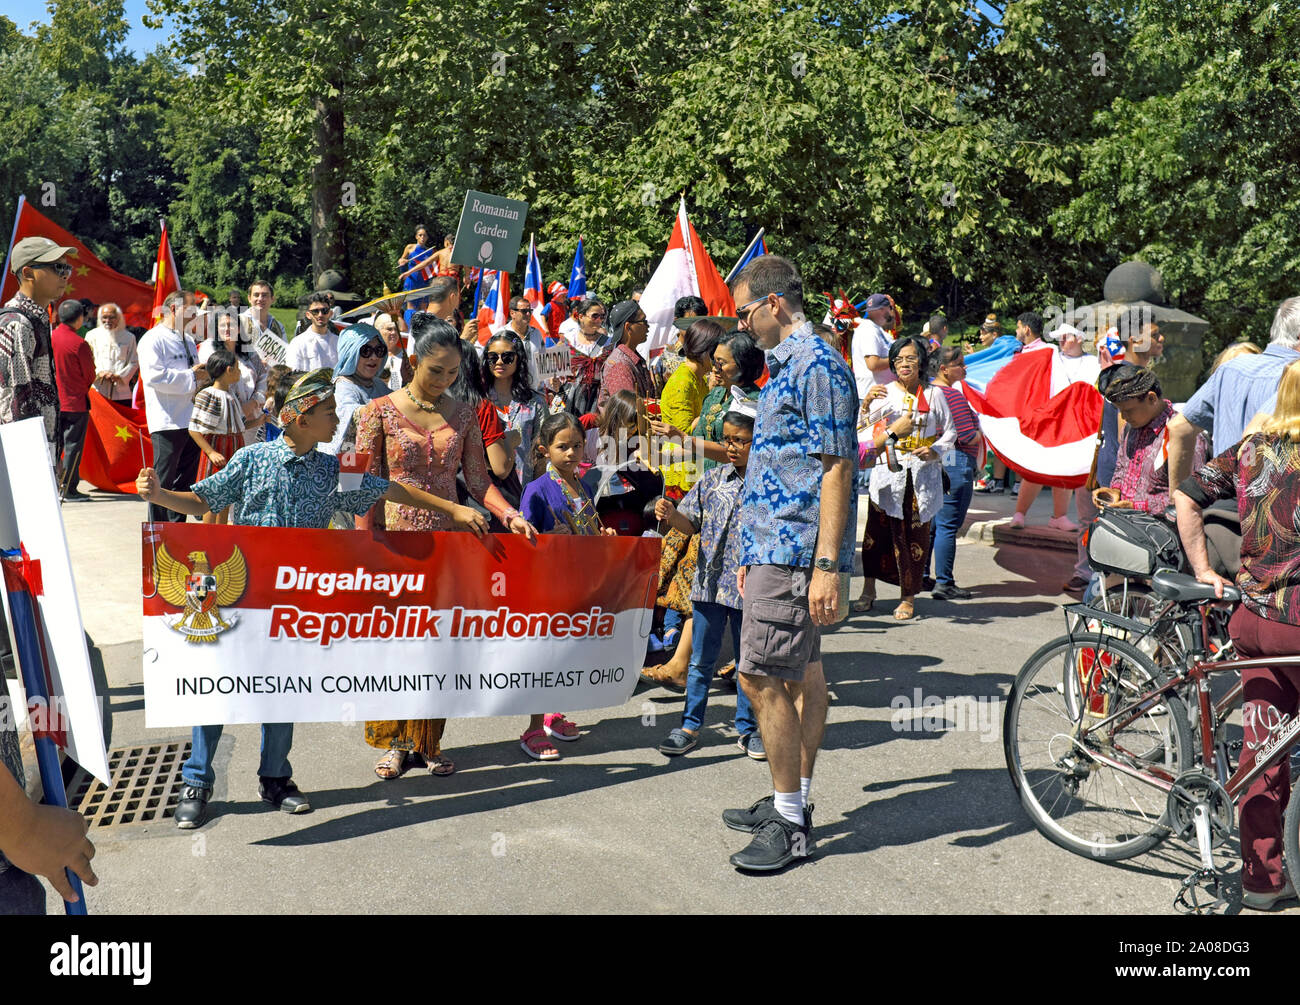 Participants in the 2019 One World Day Celebration, held annually in Cleveland, Oho, USA prepare for the opening parade of nationalities. Stock Photo